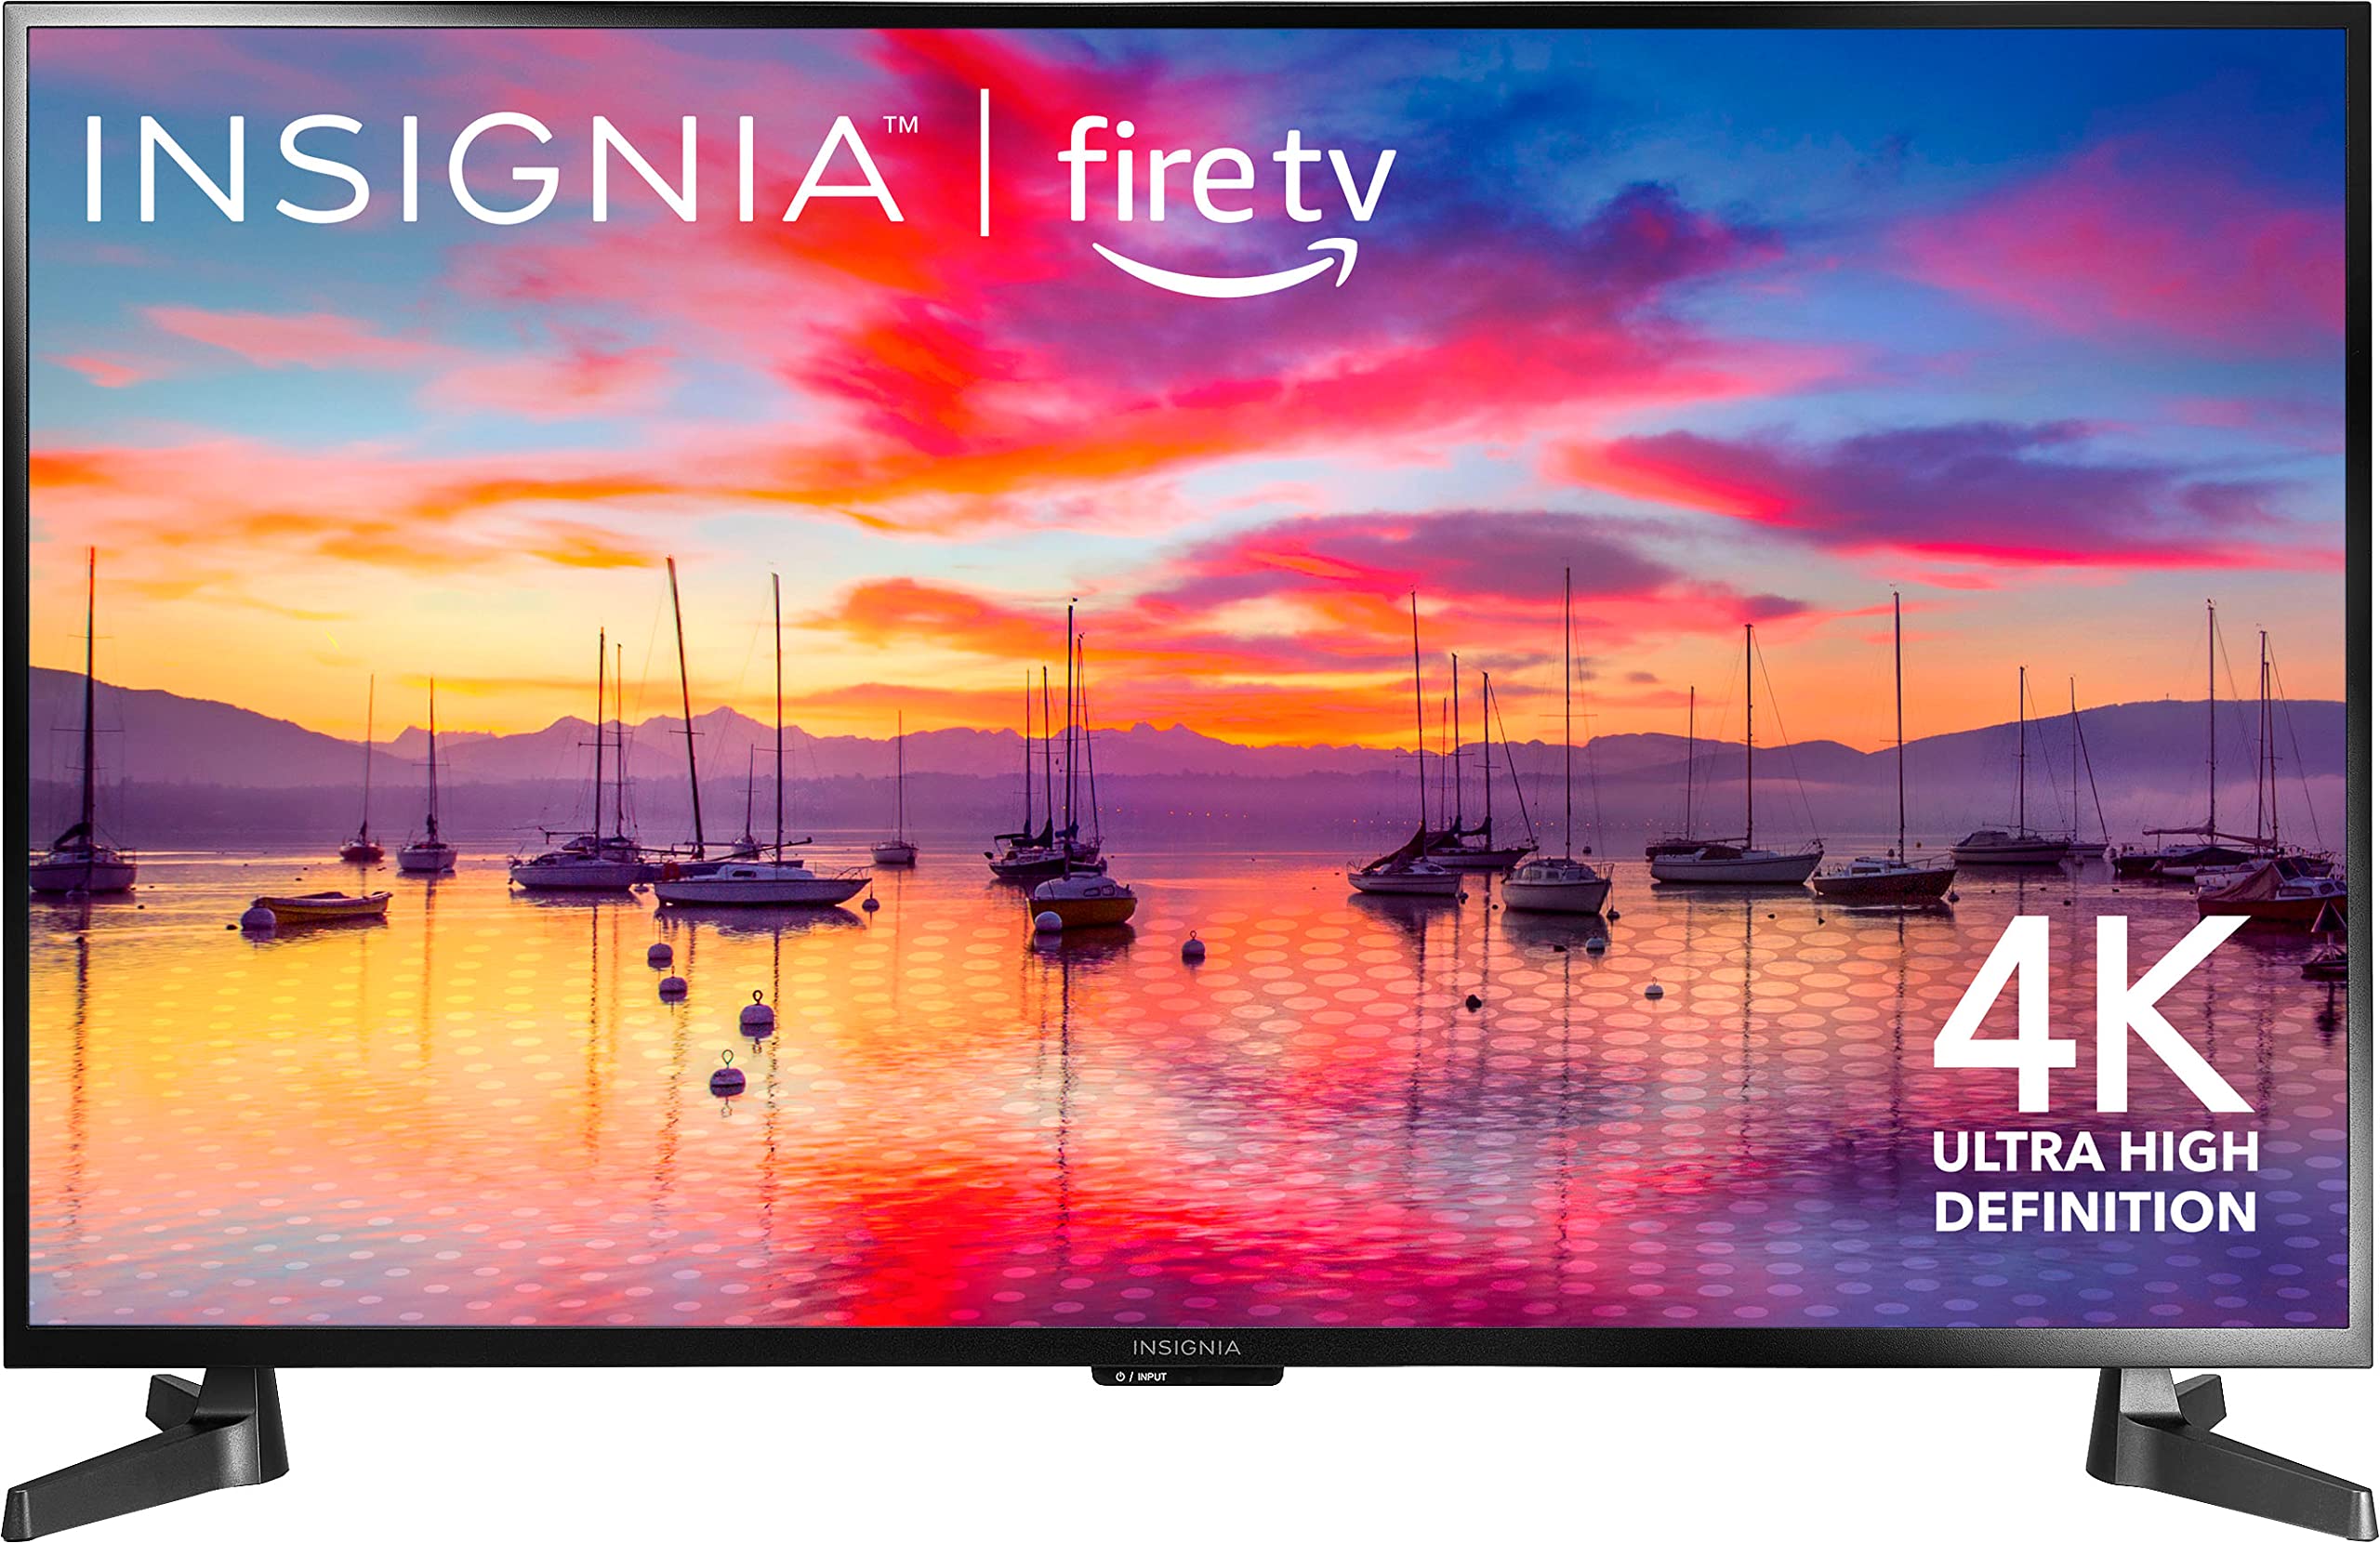 43" INSIGNIA Class F30 Series LED 4K UHD Smart Fire TV with Alexa Voice Remote $99.99 + Free Shipping